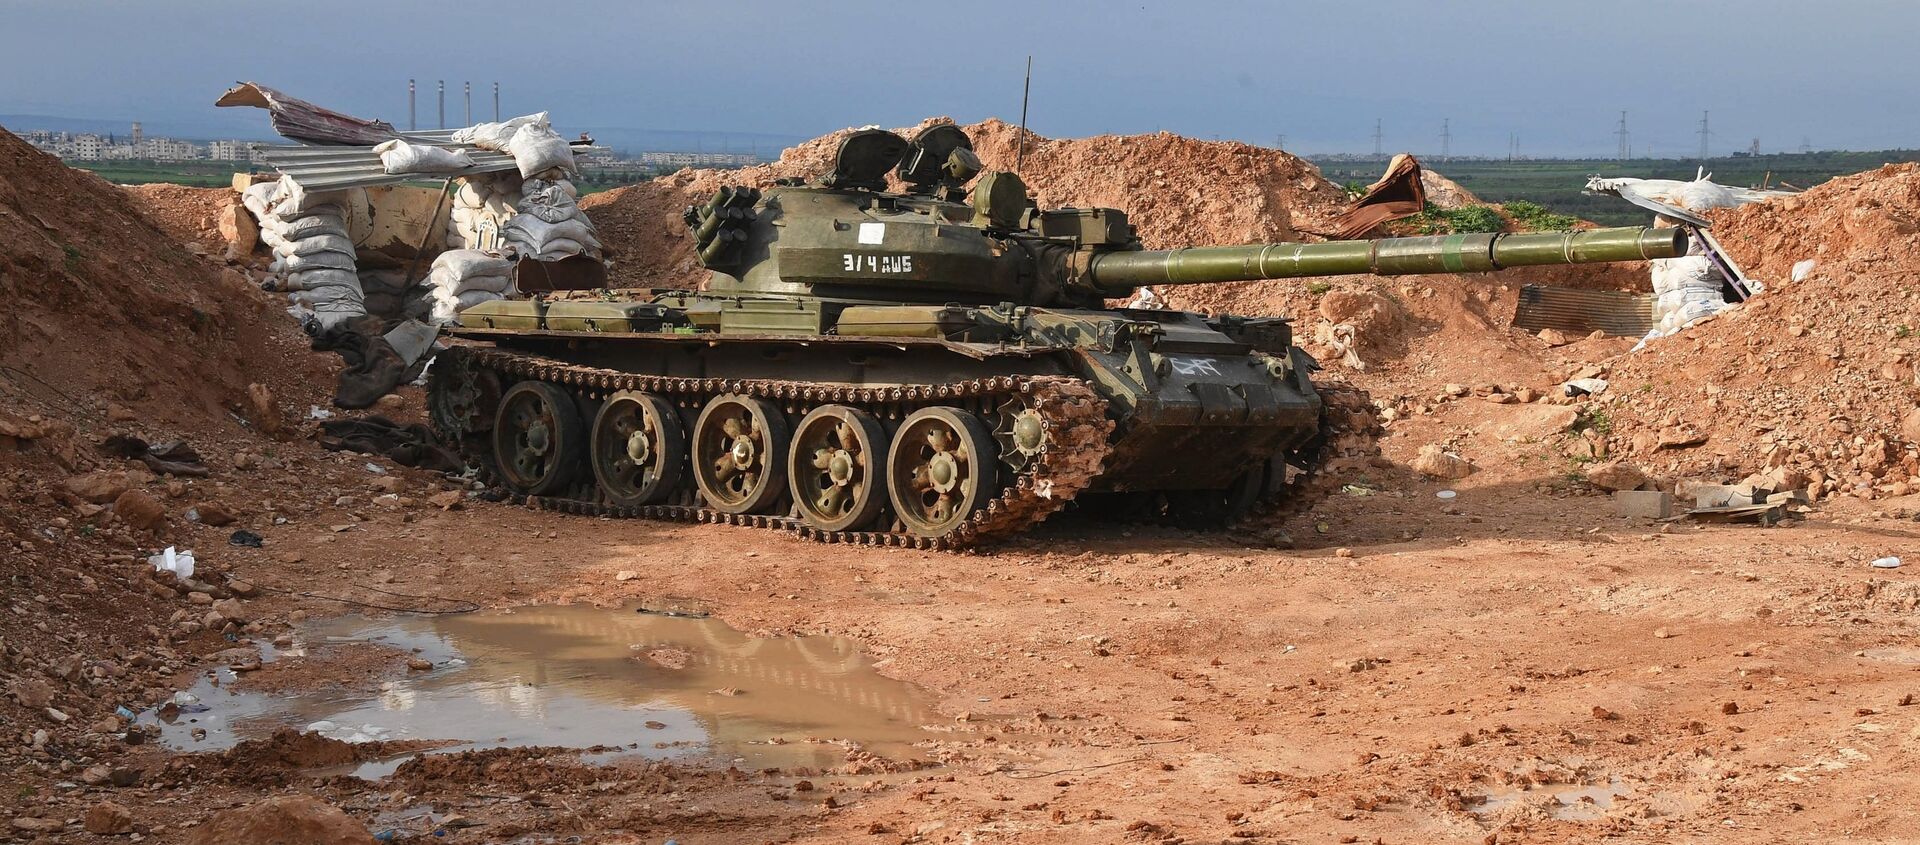 A tank at the Syrian Army's position to the north of Hama - Sputnik International, 1920, 27.12.2019